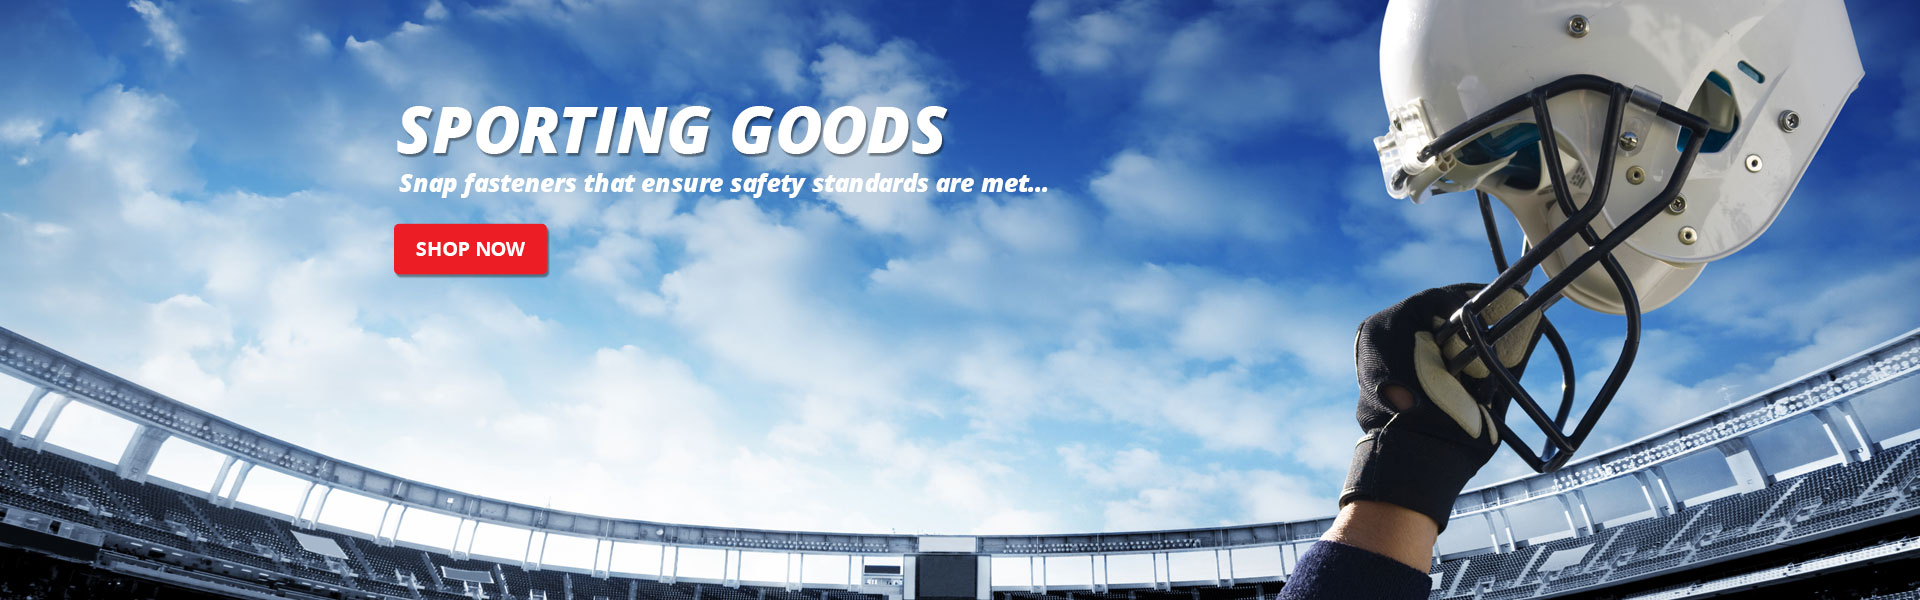 Sporting Goods Campaign Slide